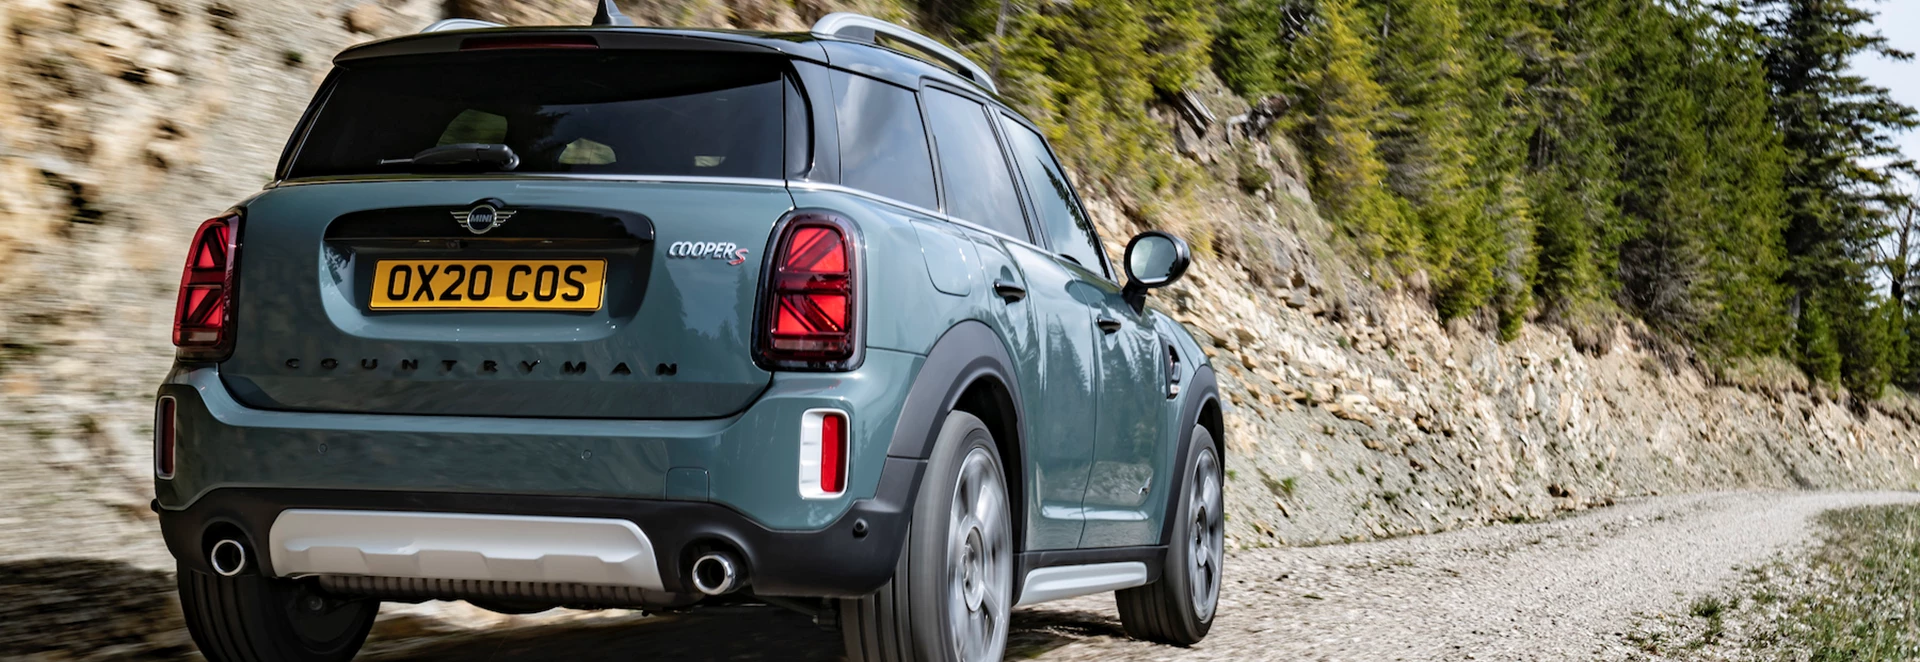 What’s new on the 2020 Mini Countryman? 